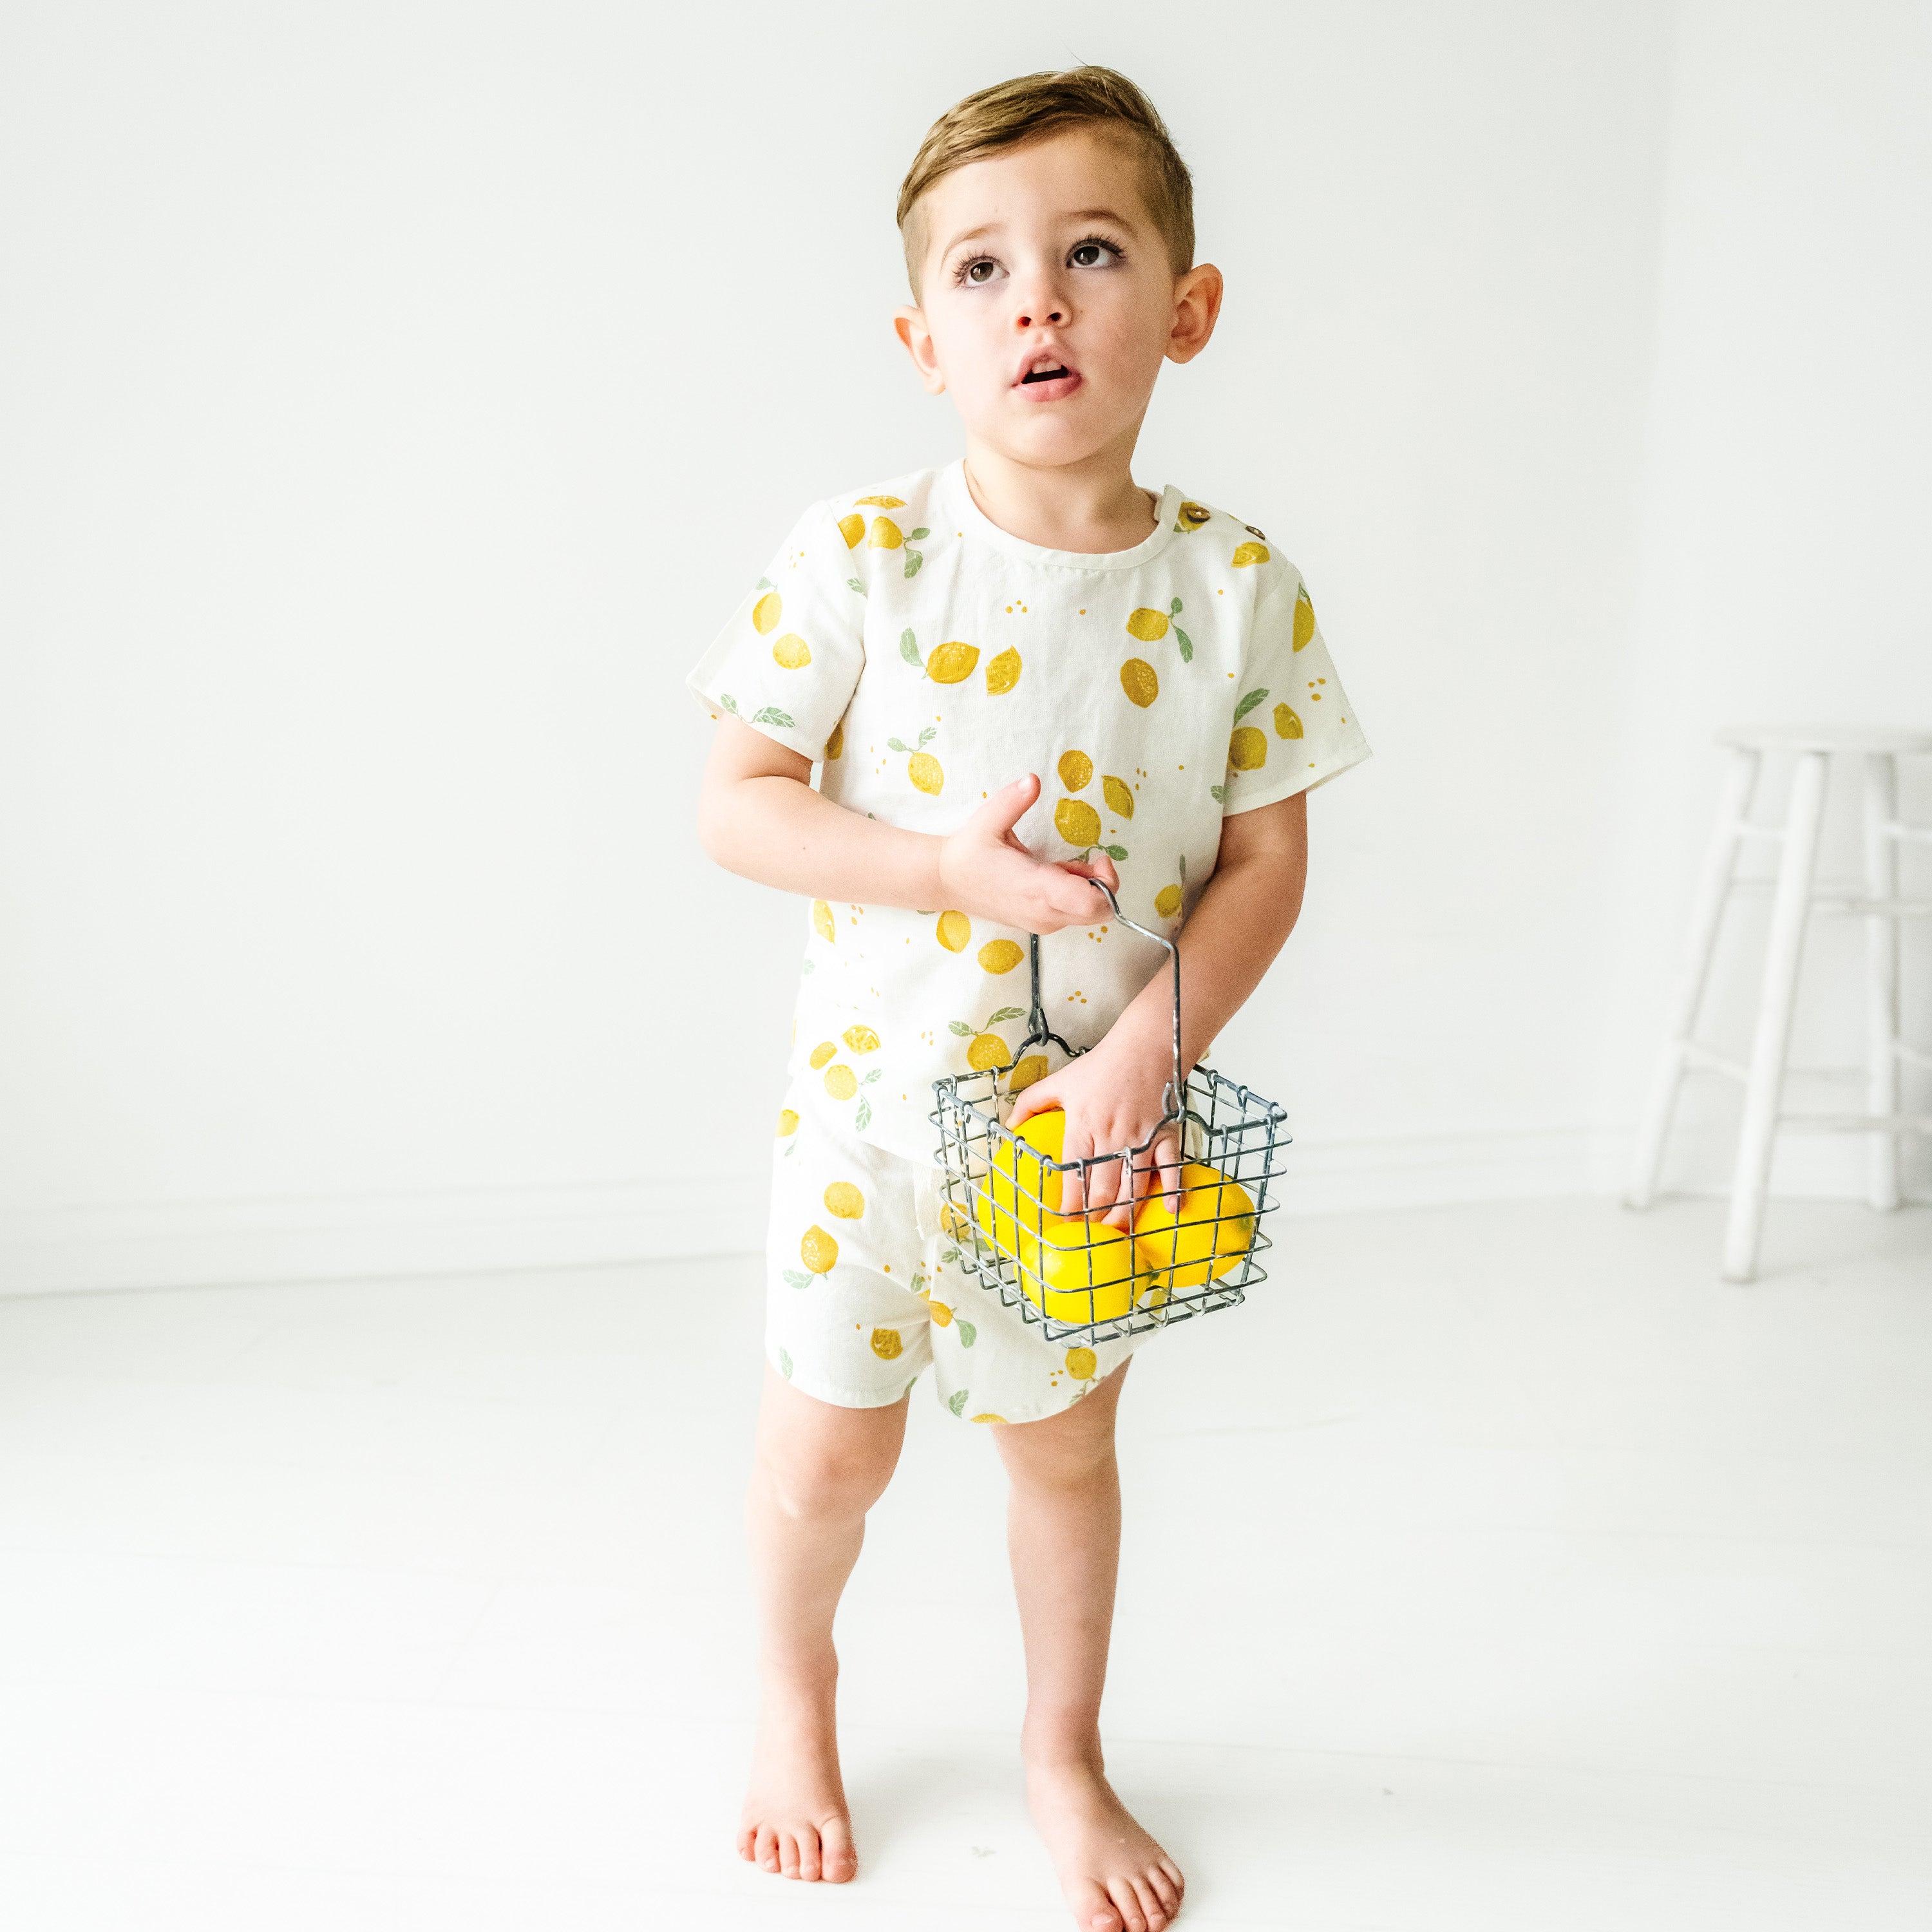 A young girl in a white outfit with lemon prints stands barefoot, holding a small yellow wire basket, looking slightly surprised in a bright, white room wearing the Organic Linen Top and Shorts 2 Piece Set in Citron by Makemake Organics.